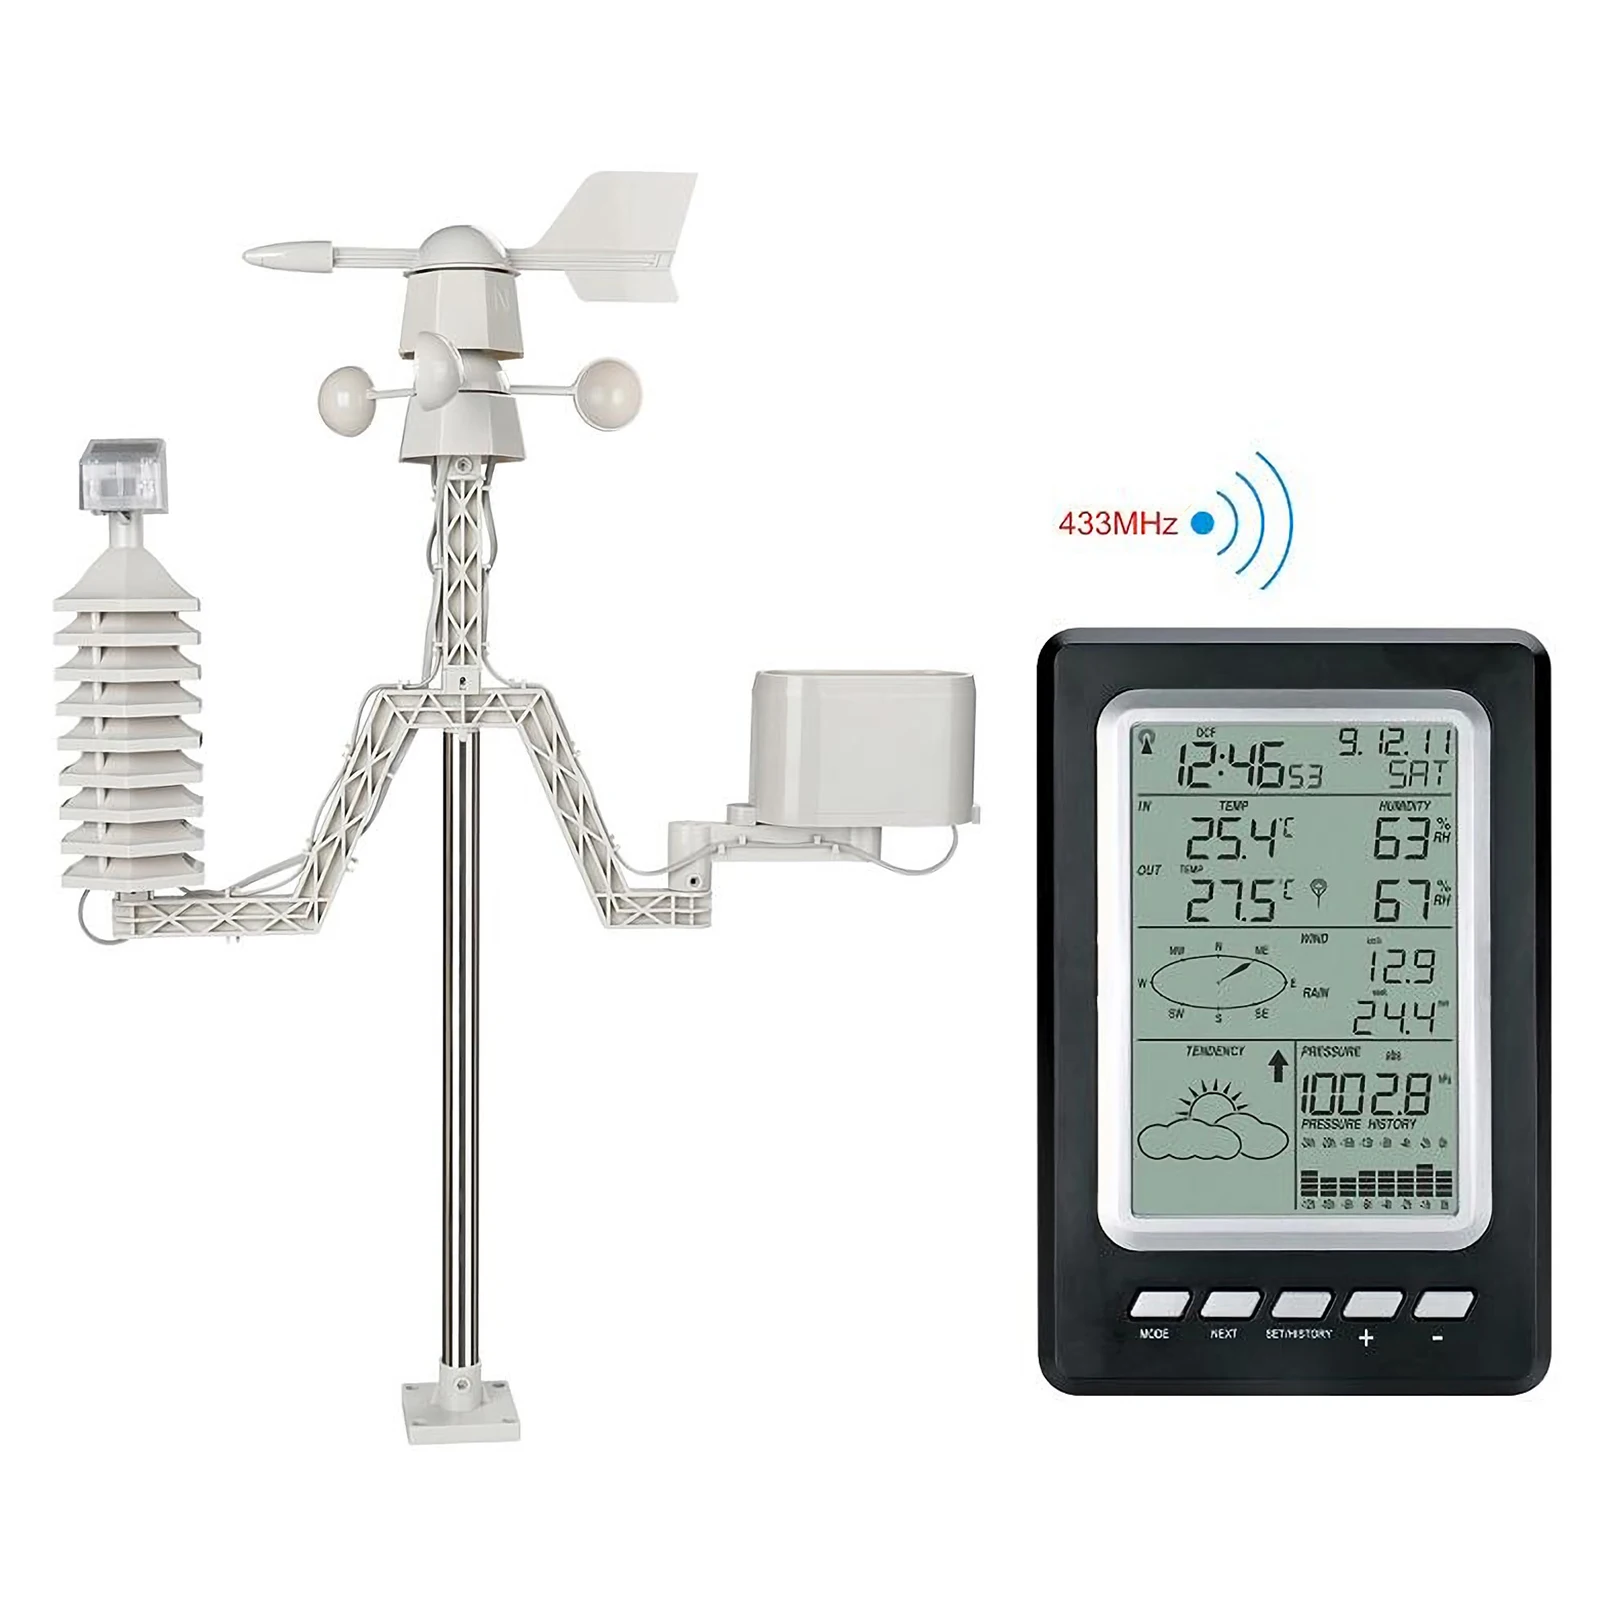 https://ae01.alicdn.com/kf/Hc5b28396a2b84bb8afe3edd5a0360ec2l/RF-433MHz-Wireless-Indoor-Outdoor-Weather-Forecast-Station-Digital-LCD-Thermometer-Hygrometer-Temperature-Humidity-Wind-Speed.jpg